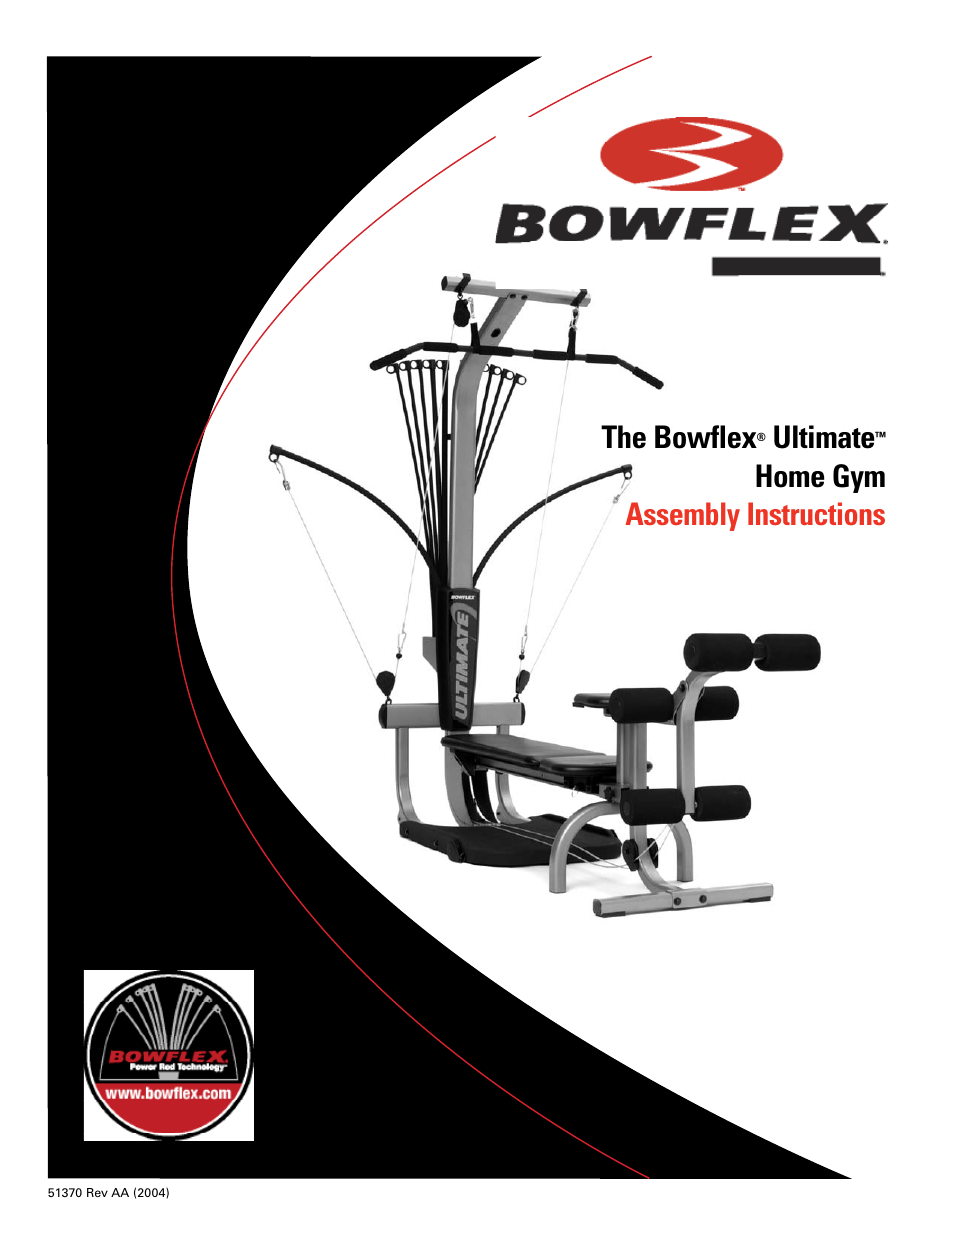 The bowflex, Ultimate, Home gym assembly instructions | Bowflex Ultimate User Manual | Page 87 / 110